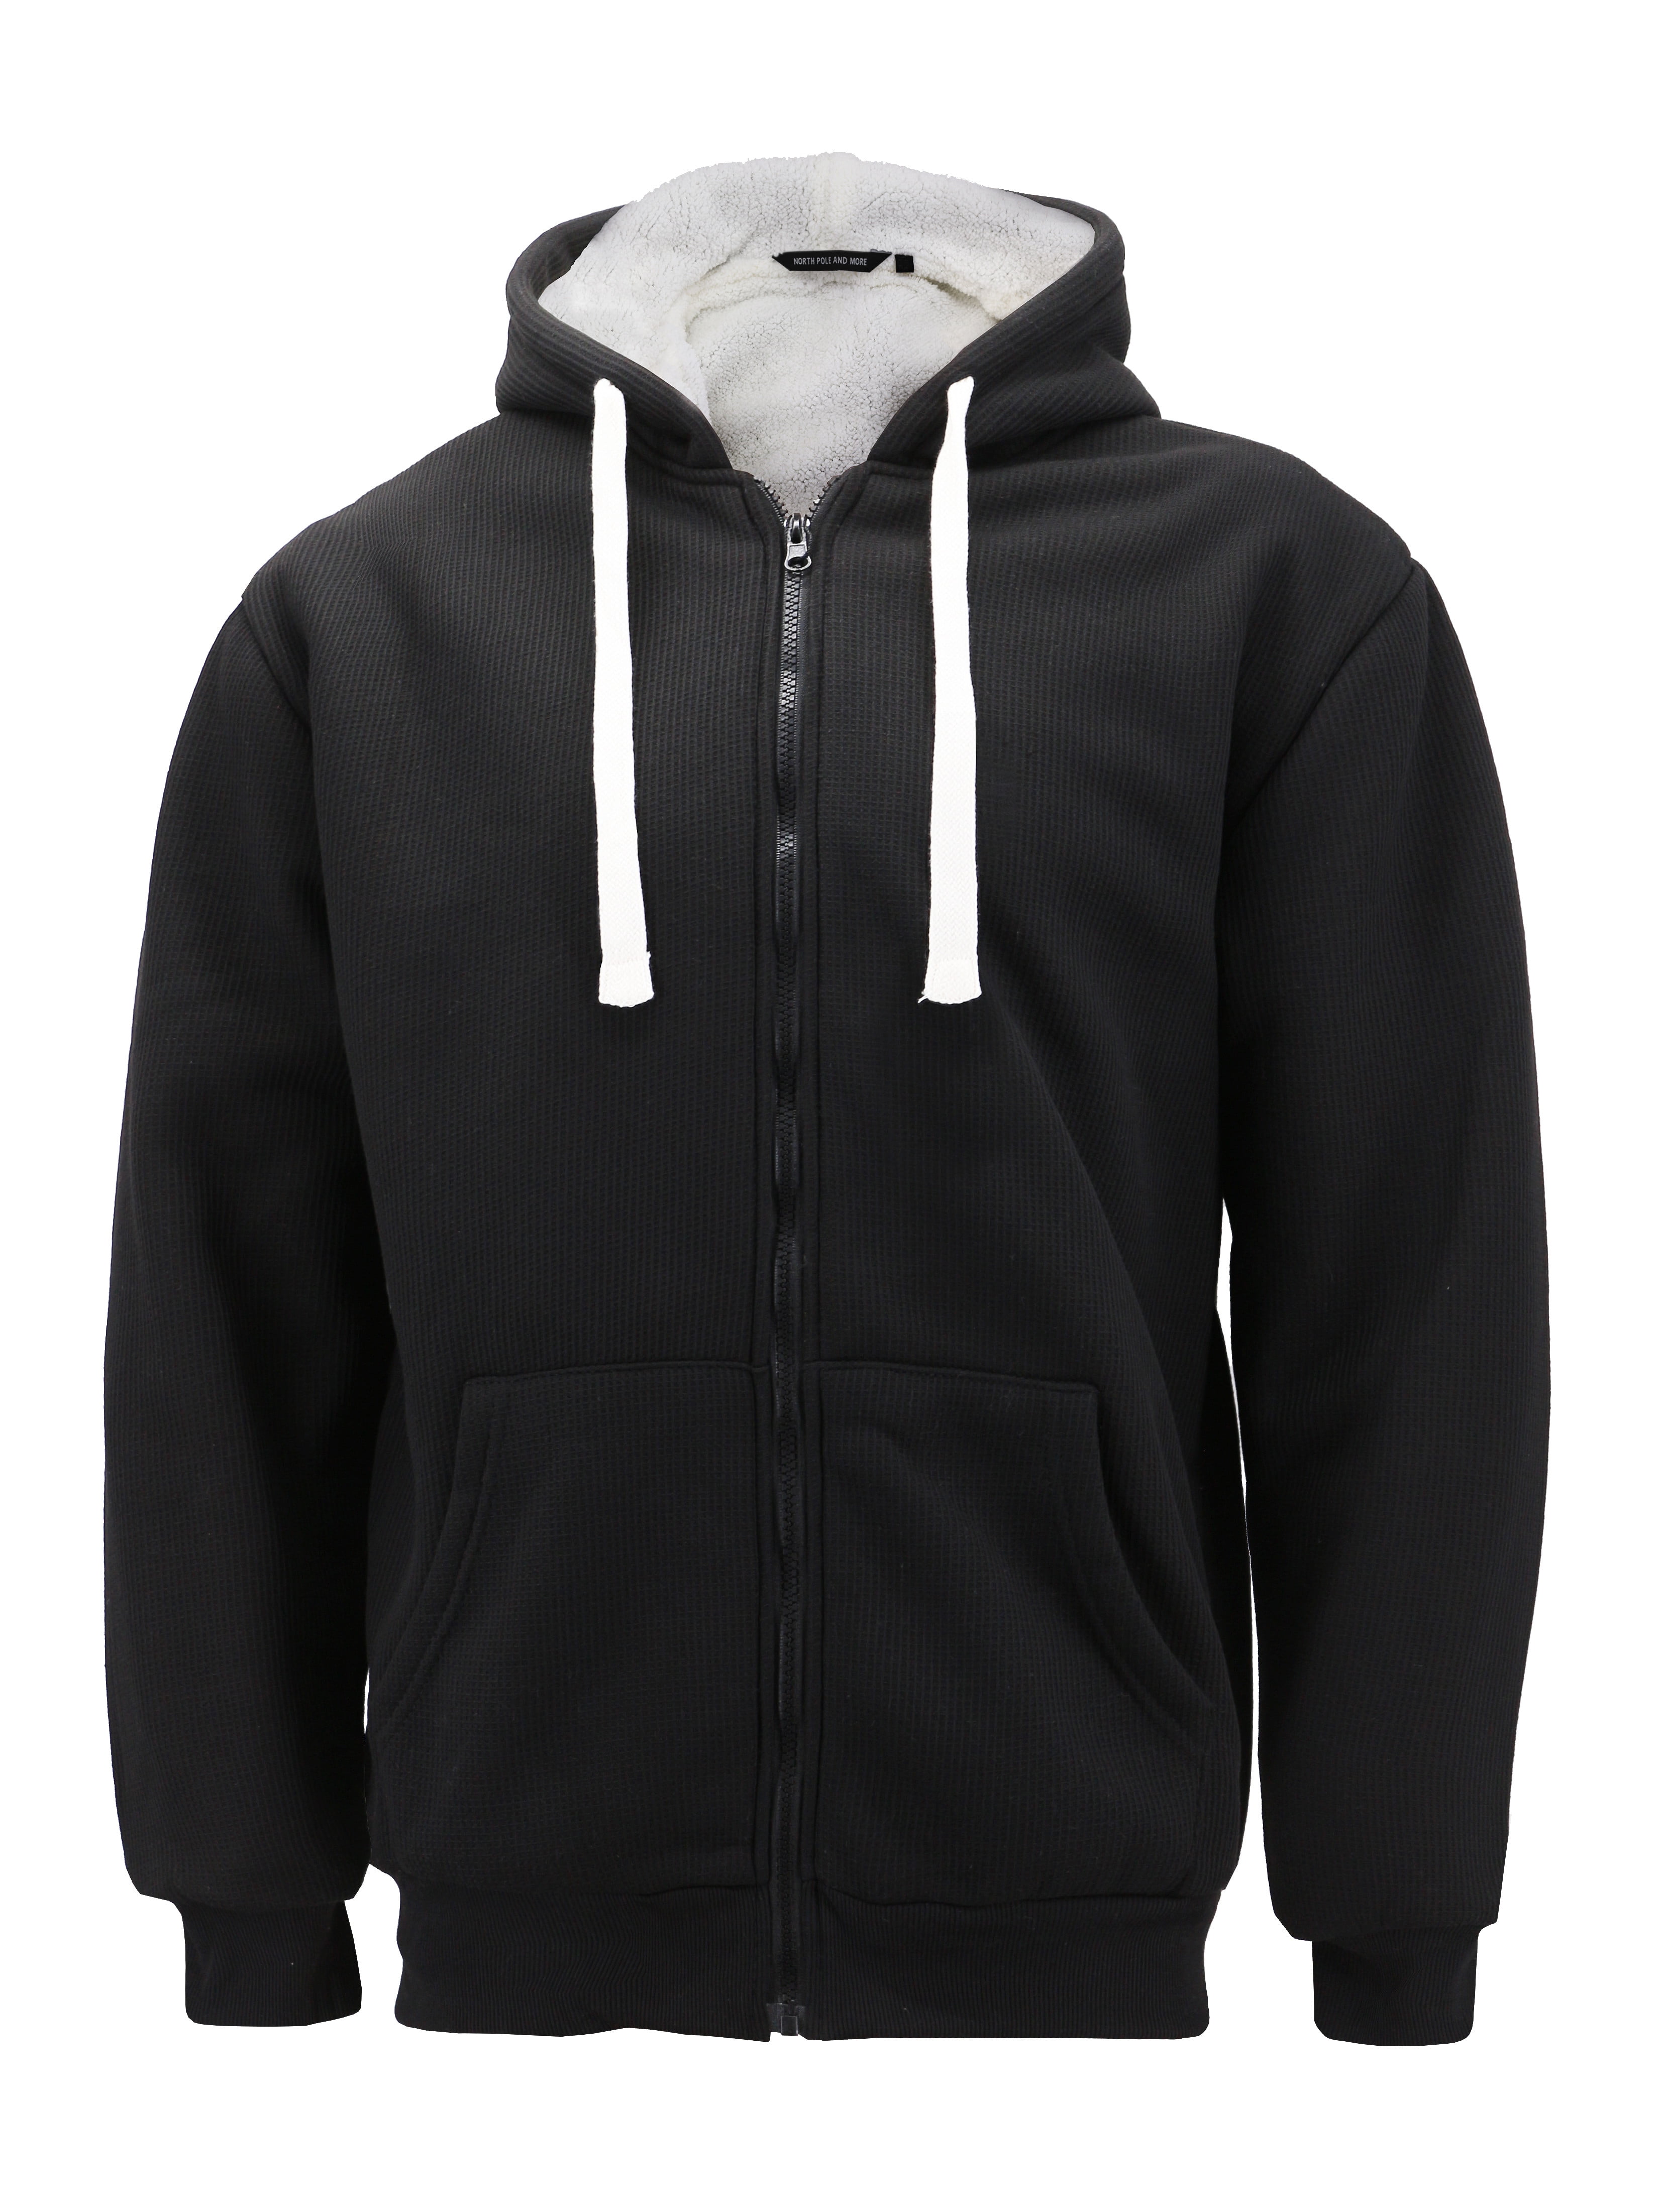 North Pole - Men's Heavyweight Thermal Zip Up Hoodie Warm Sherpa Lined ...